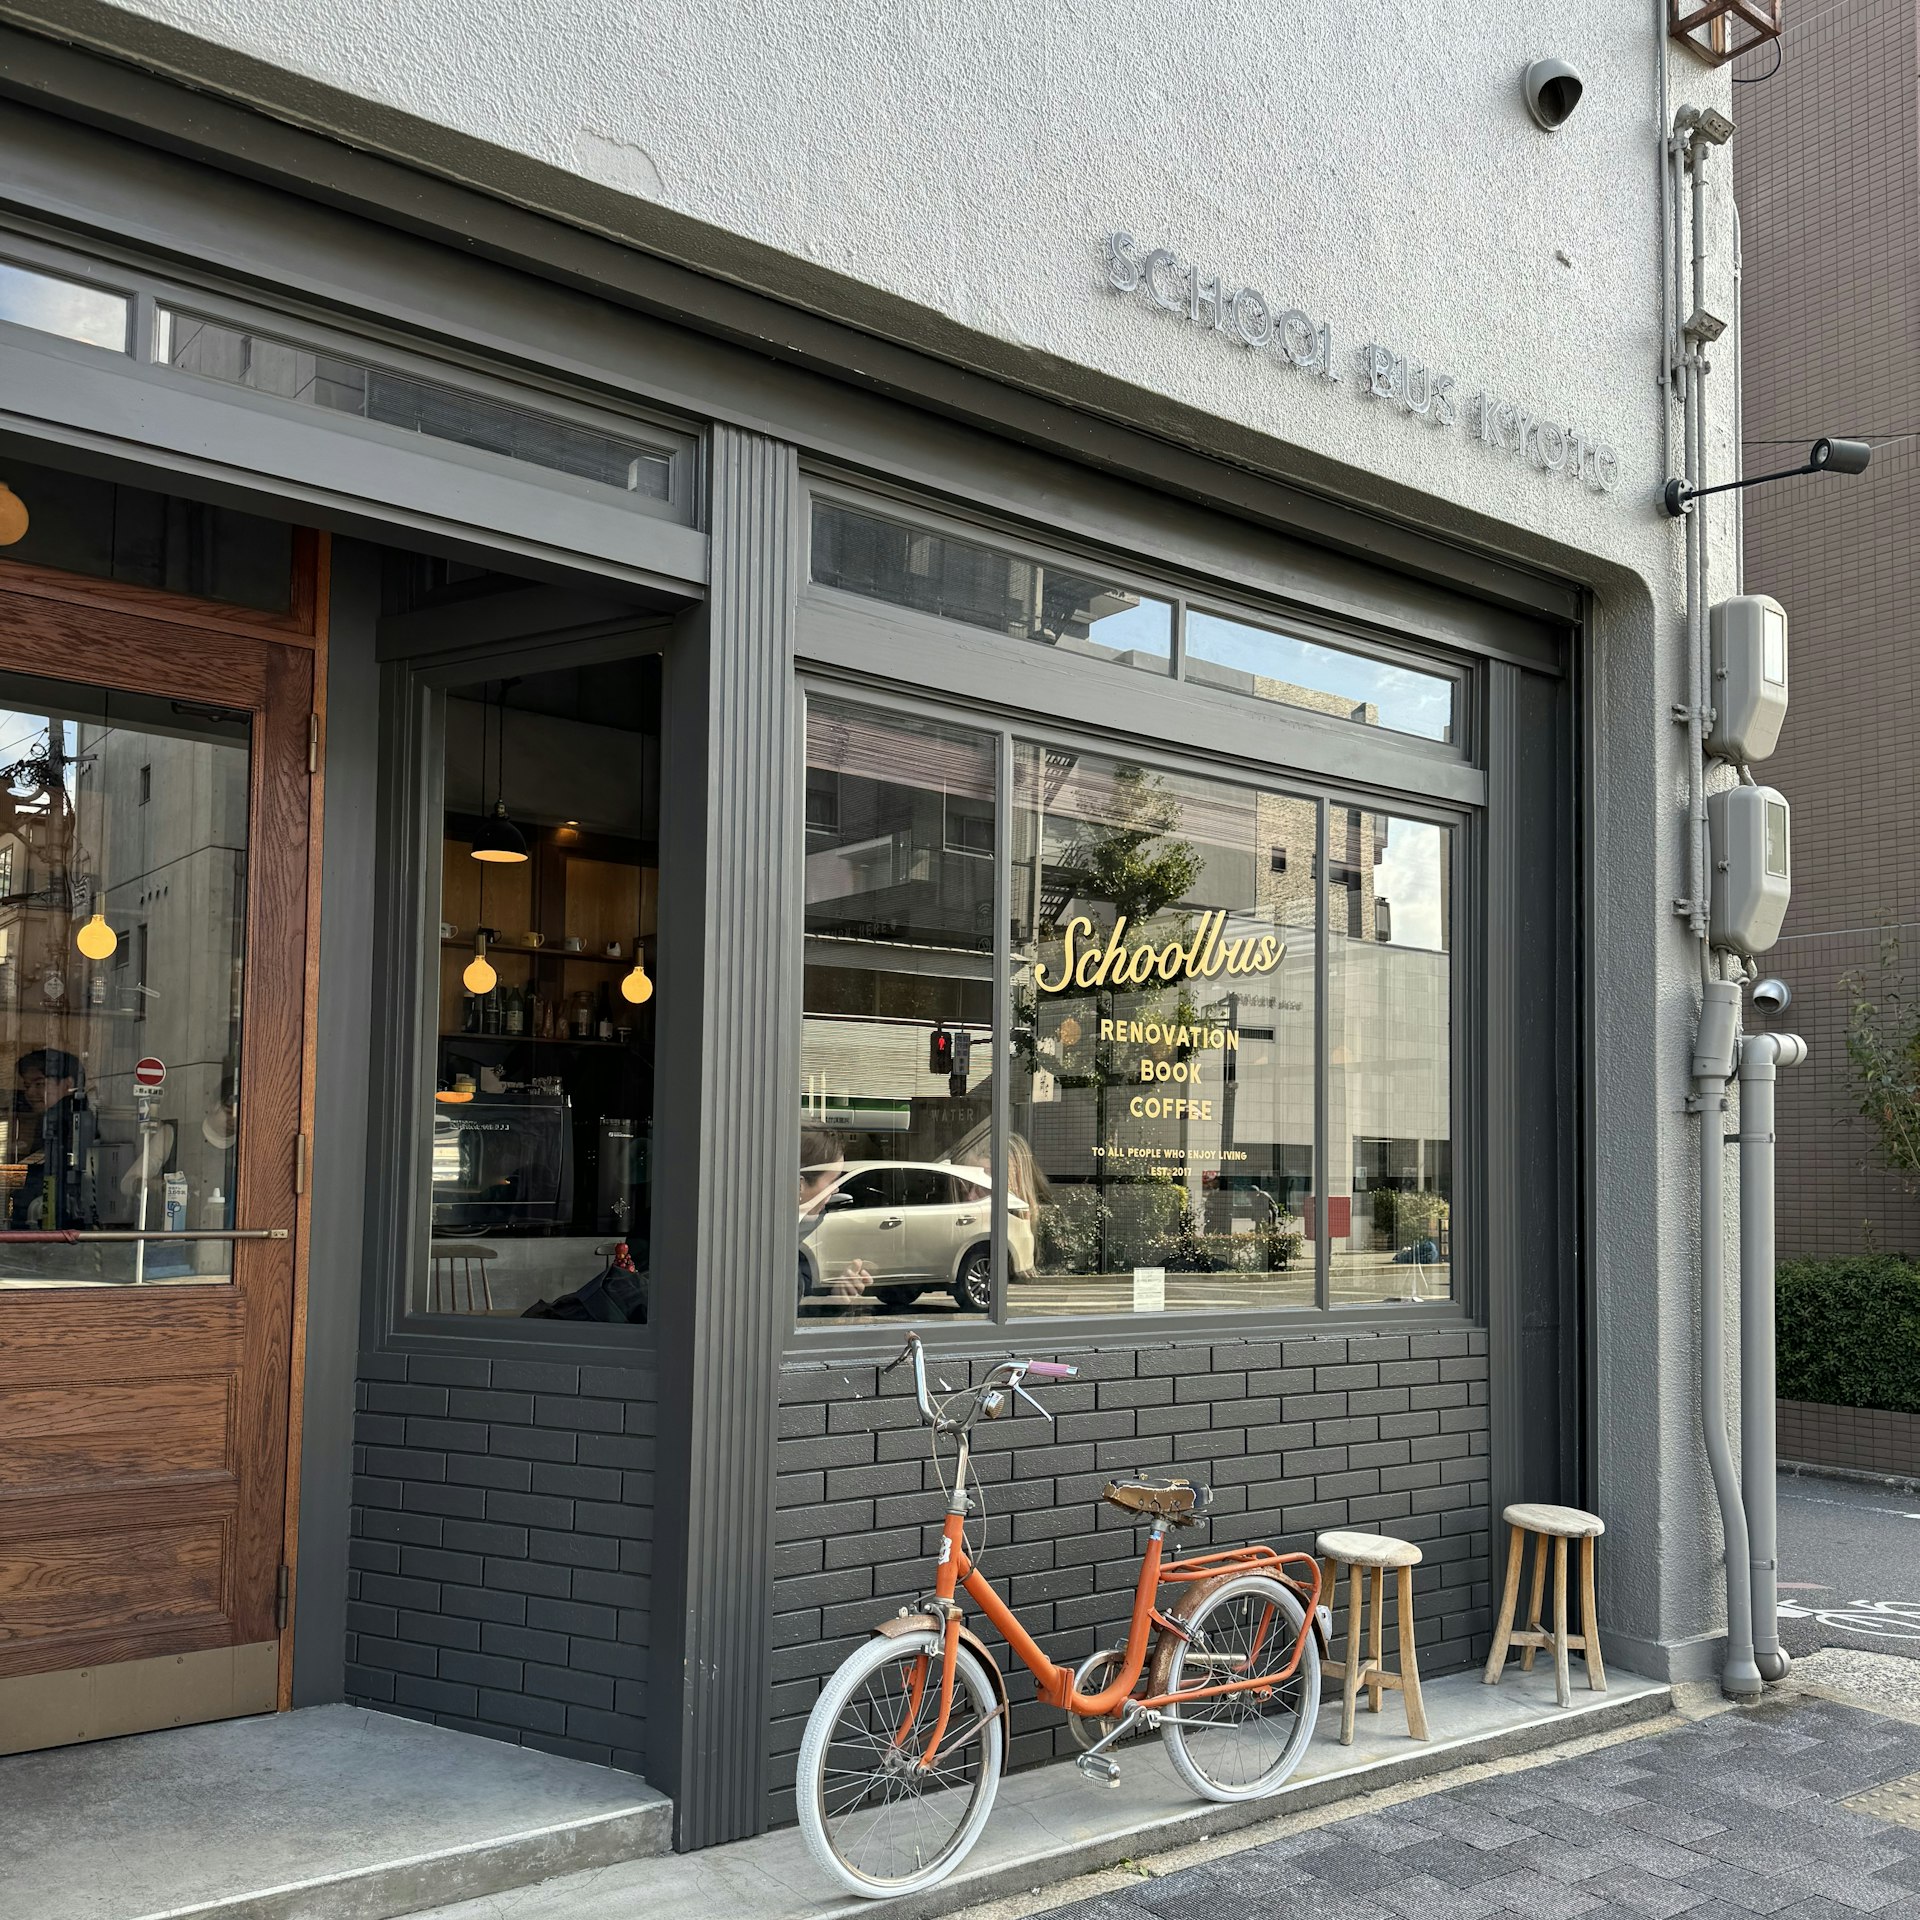 The exterior of School Bus Cafe, Kyoto, Japan